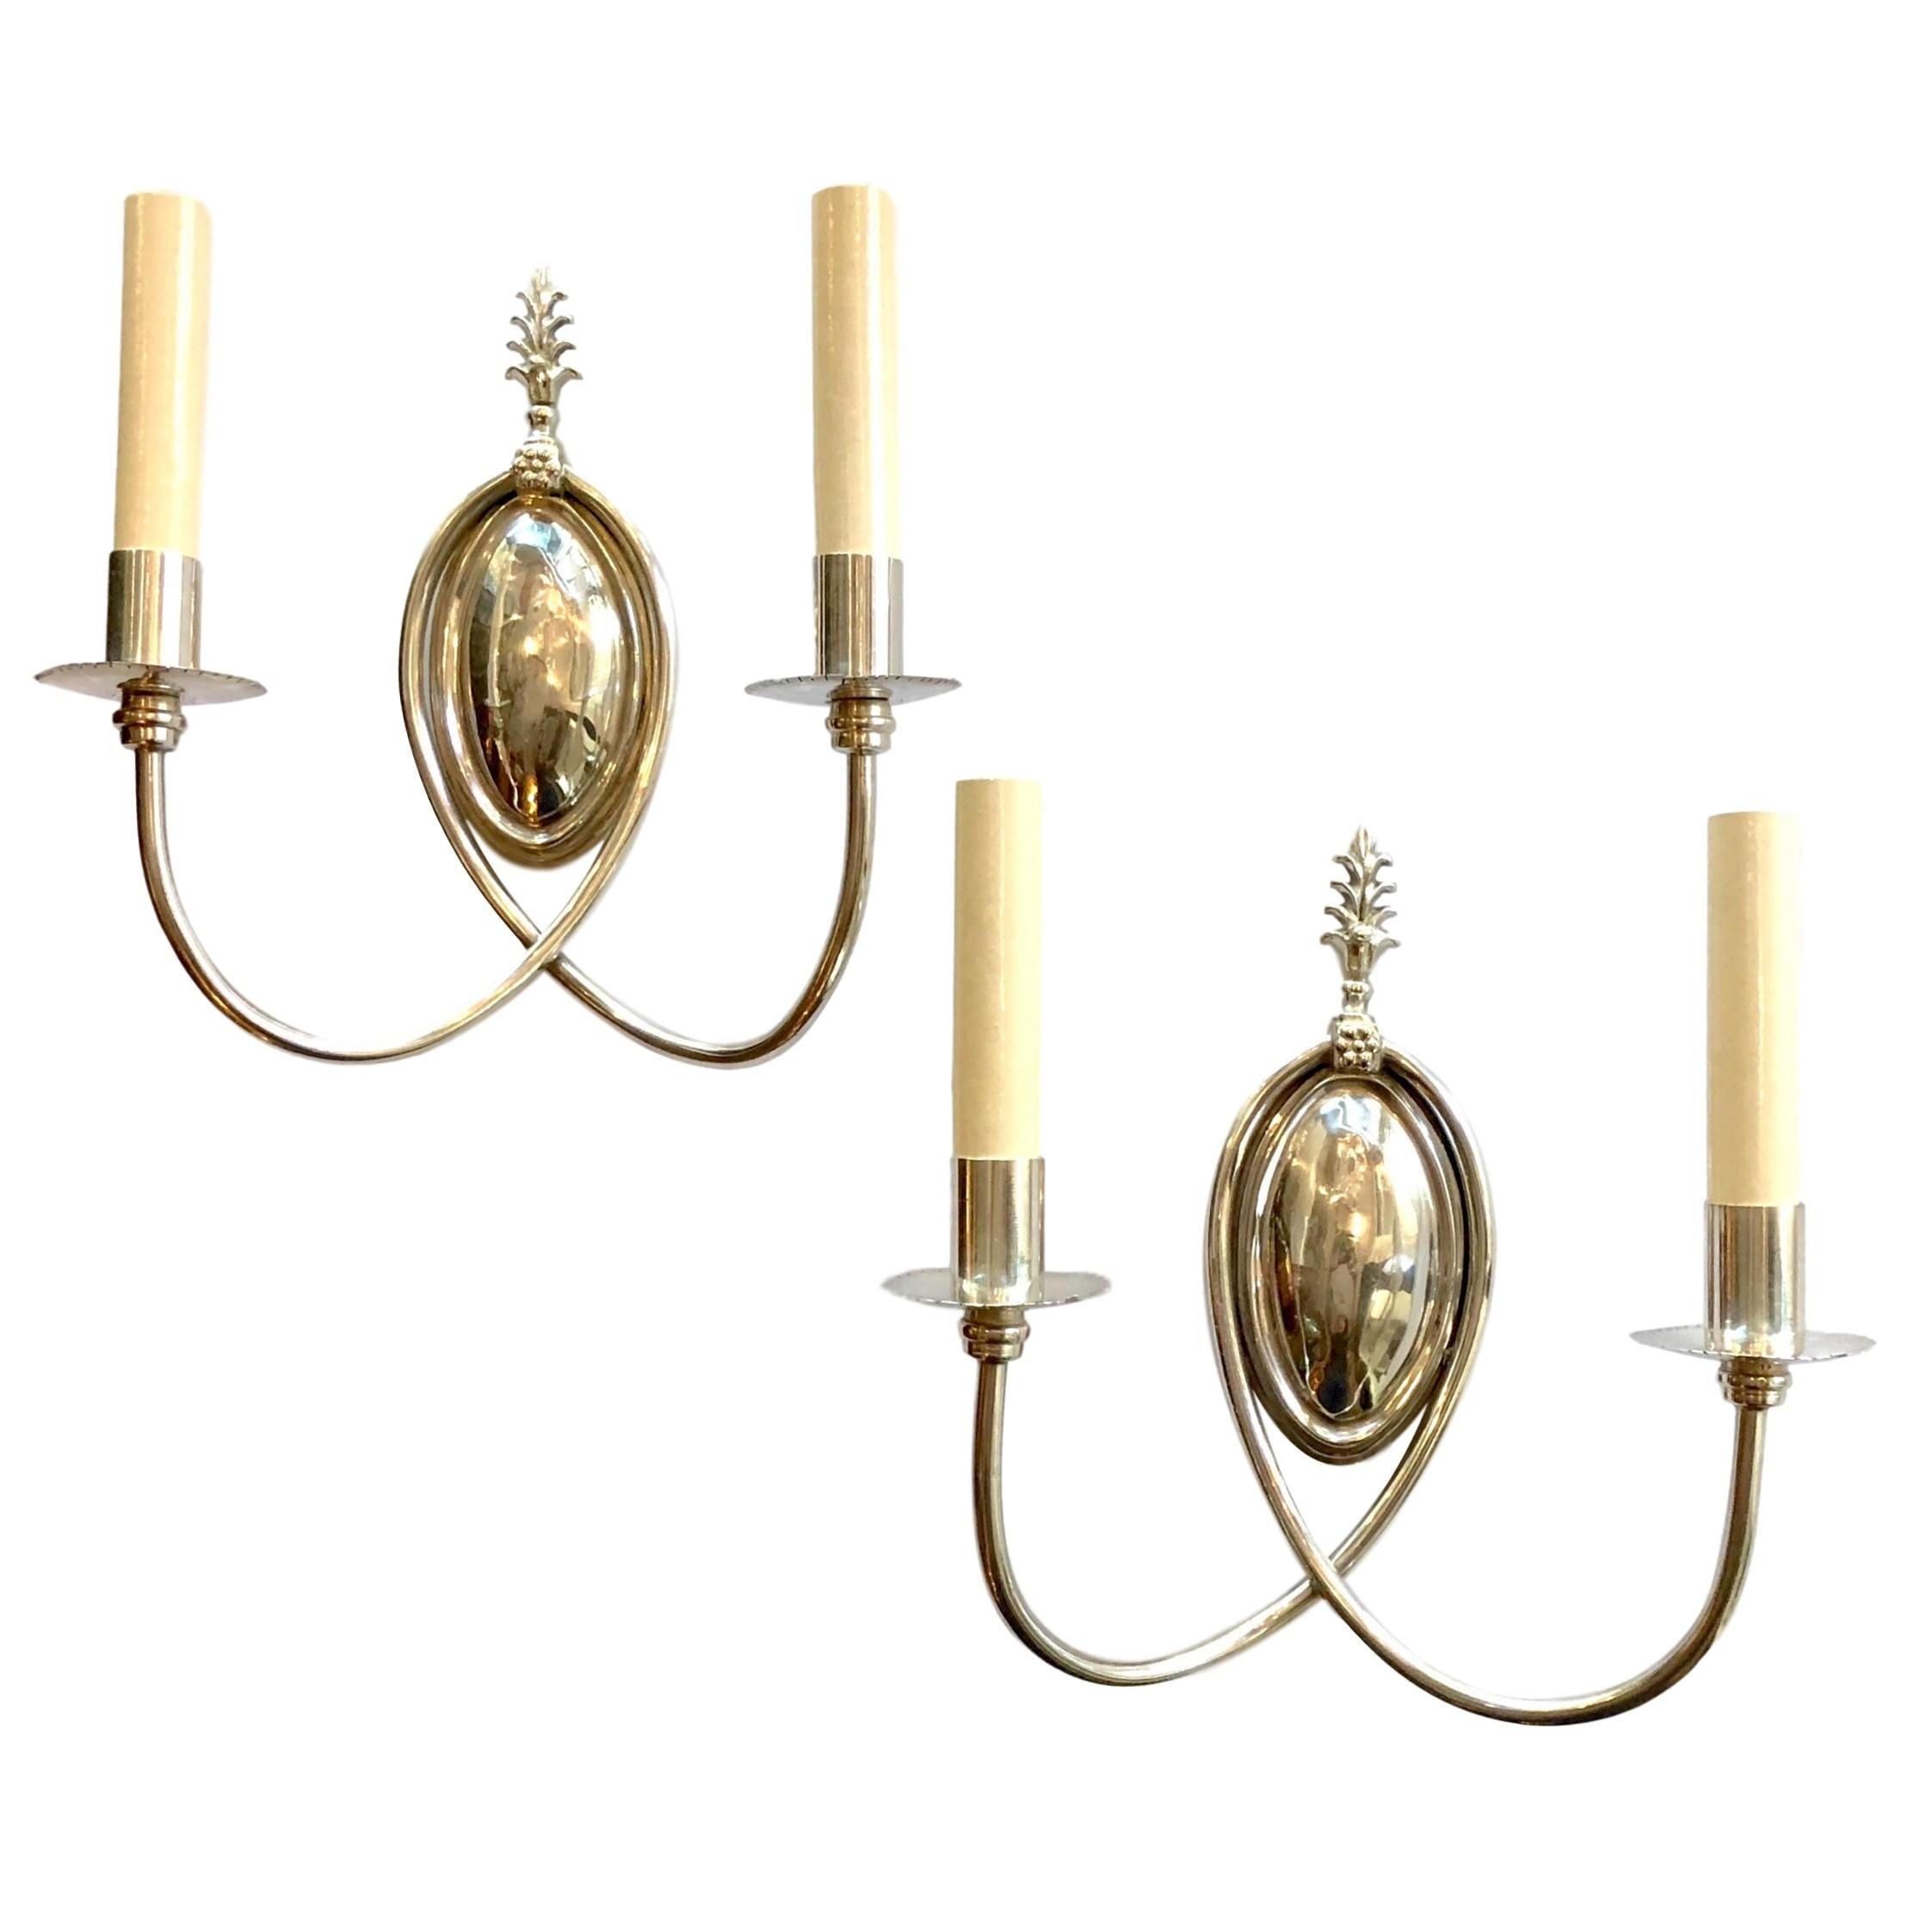 Pair of English Silver-Plated Sconces